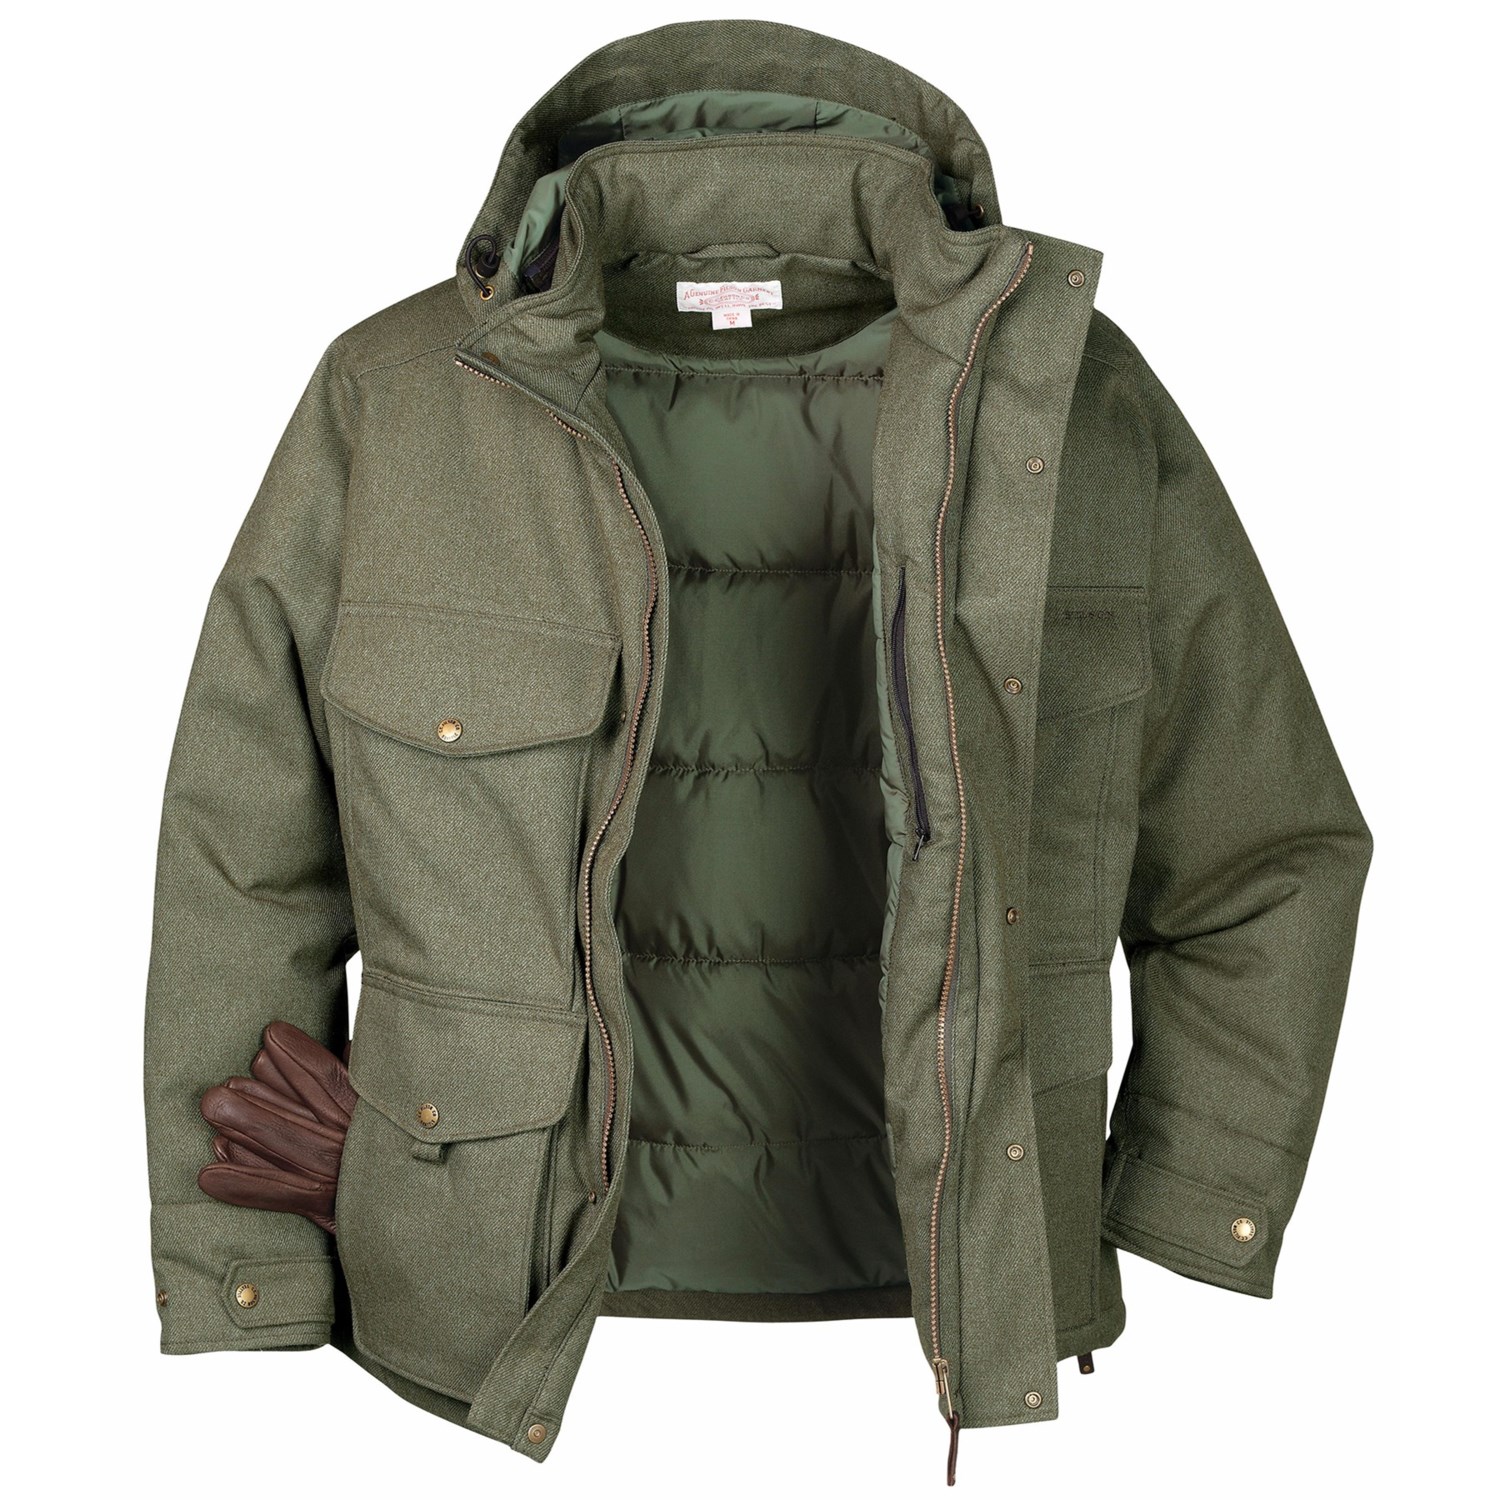 Filson Portage Bay Jacket - Waterproof, Insulated (For Men) - Save 38%